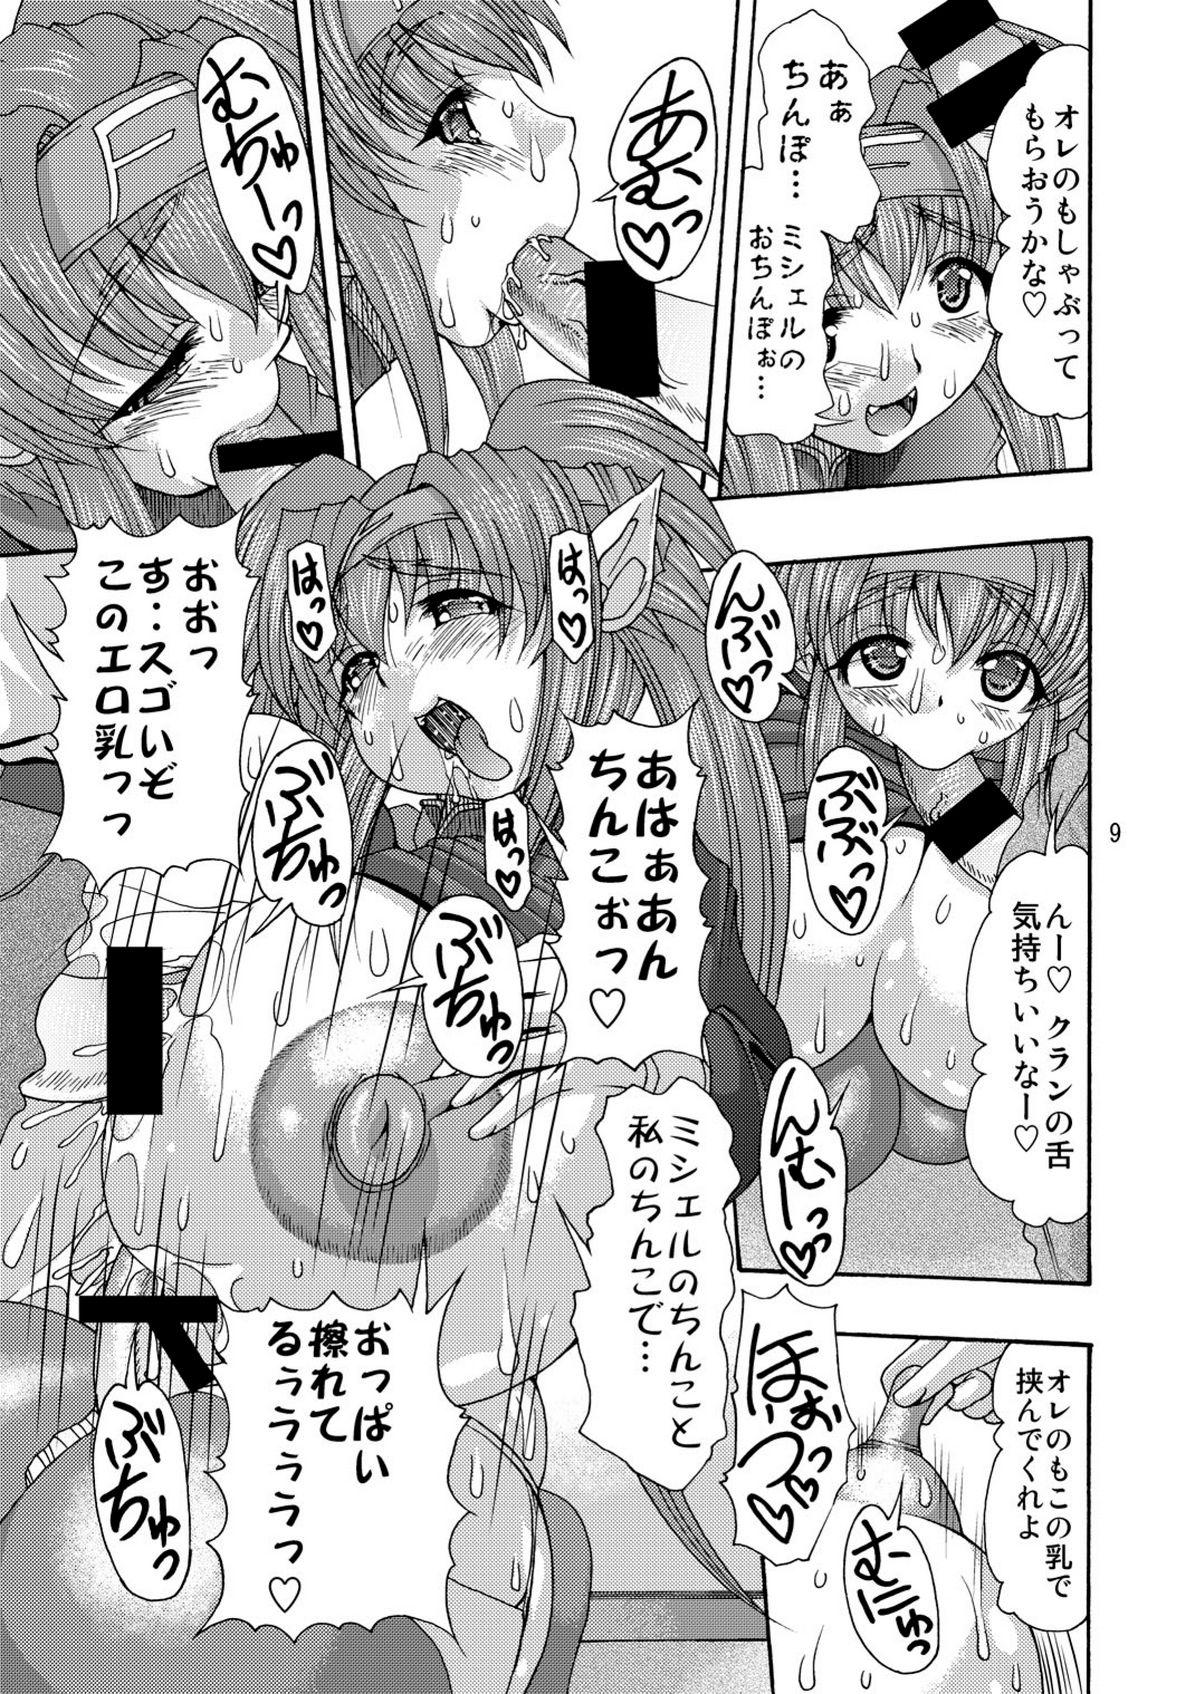 Free Rough Porn Muchipuni Paradise! - Macross frontier Asians - Page 9